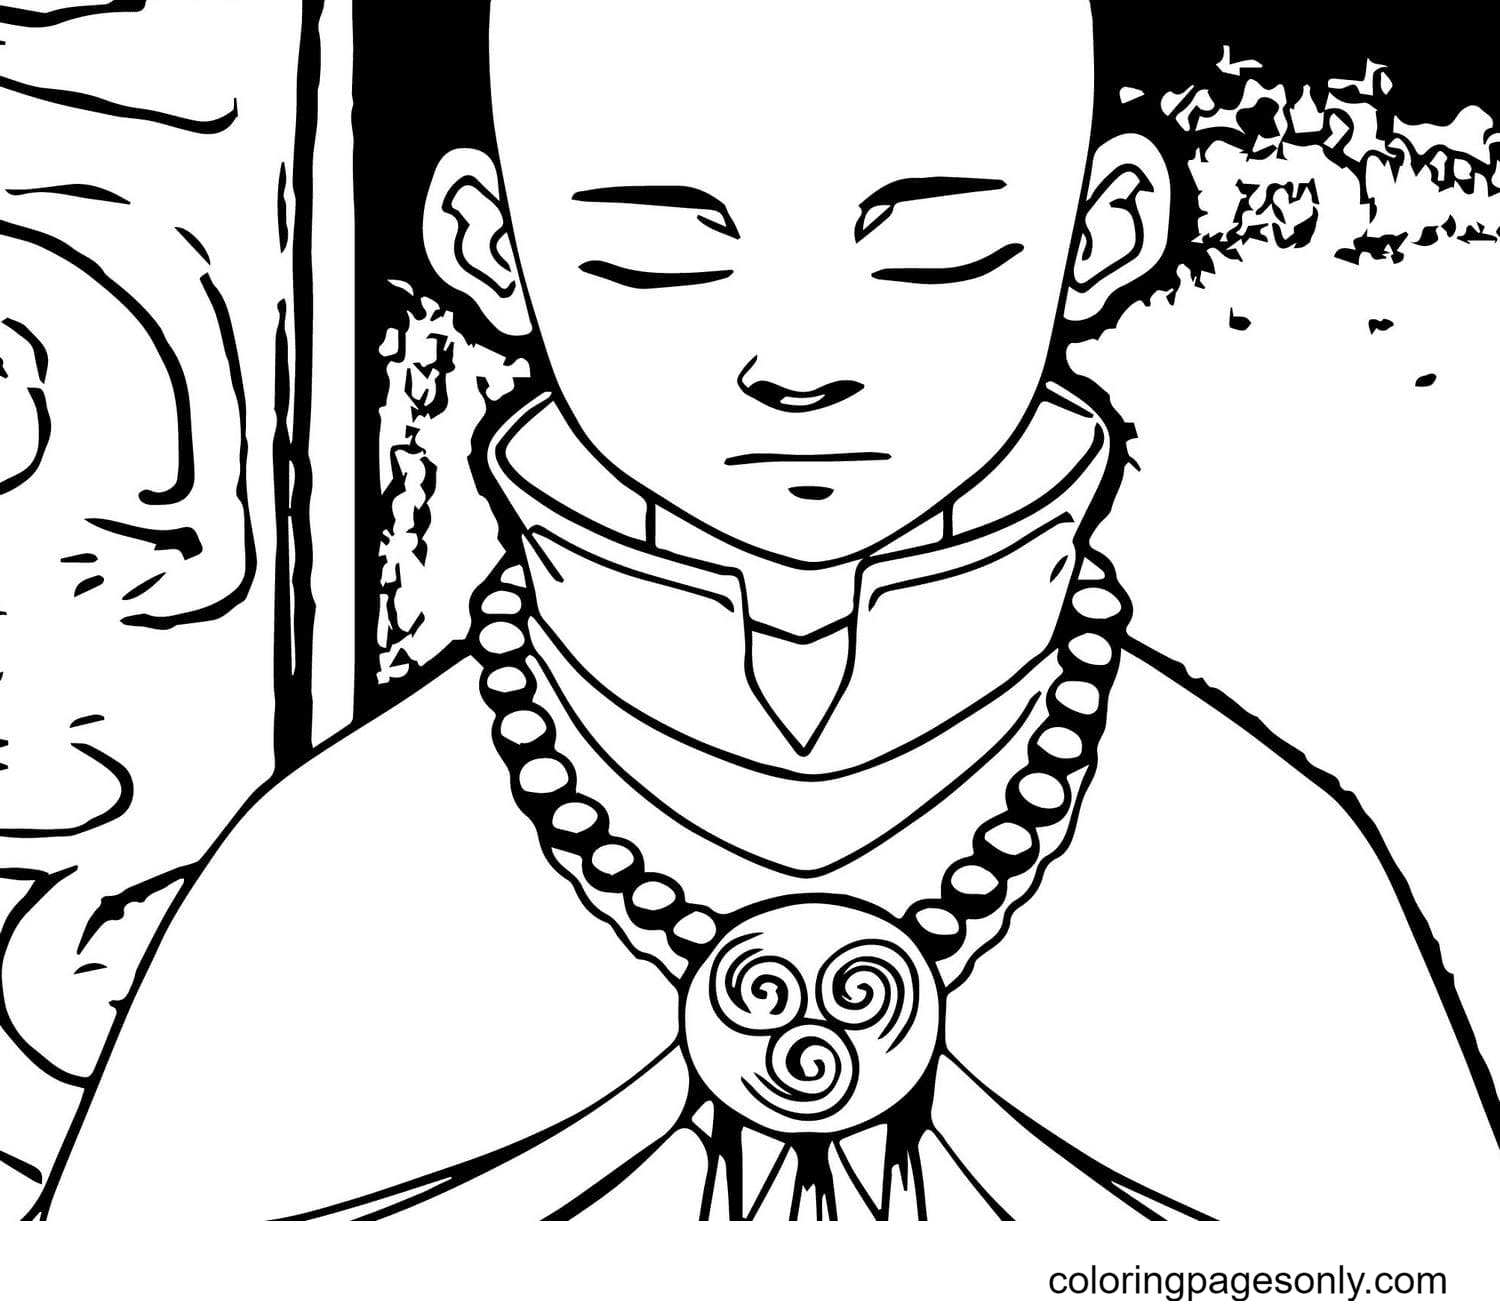 Calm Aang Coloring Pages